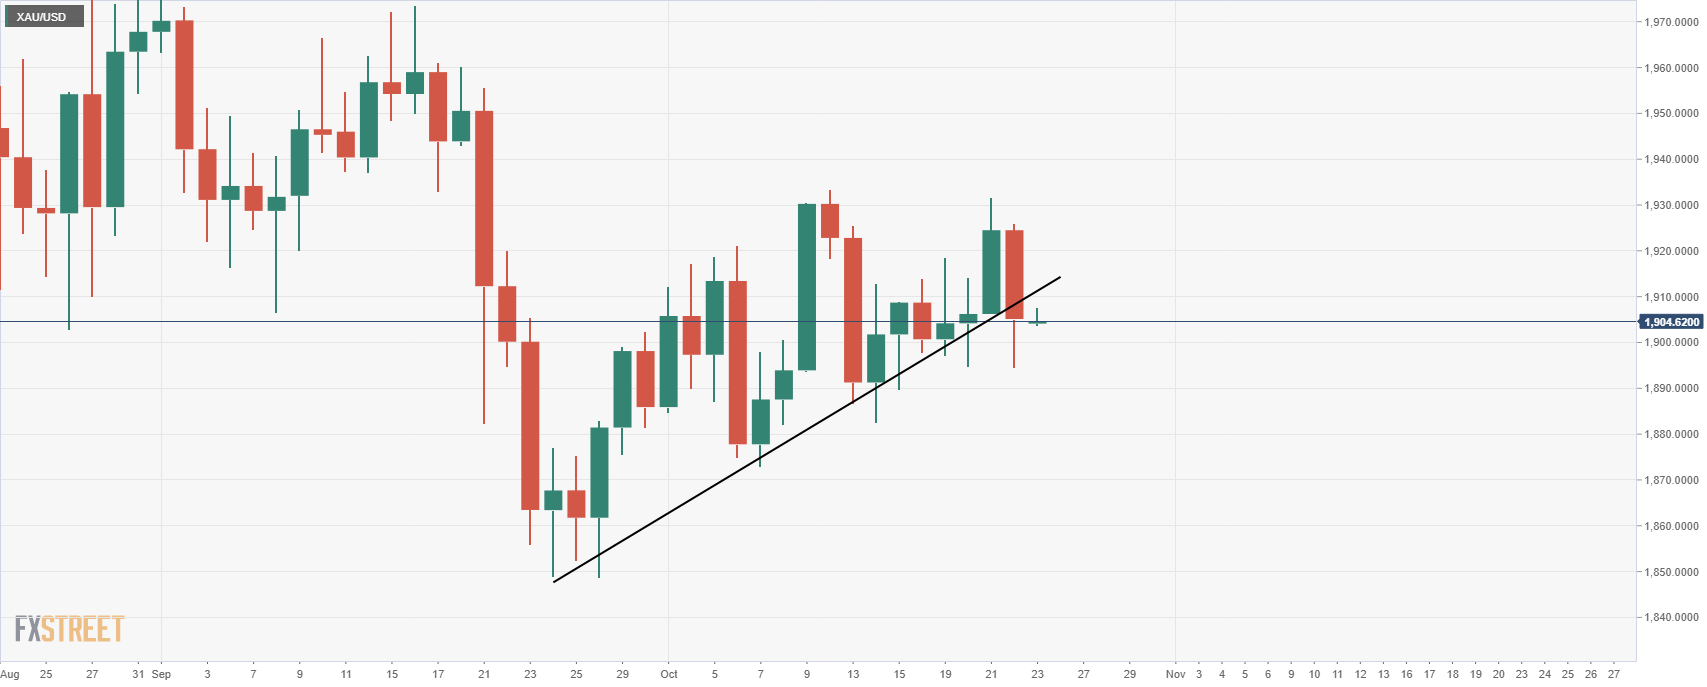 Gold Price Analysis: Bears seeking a continuation below key daily support